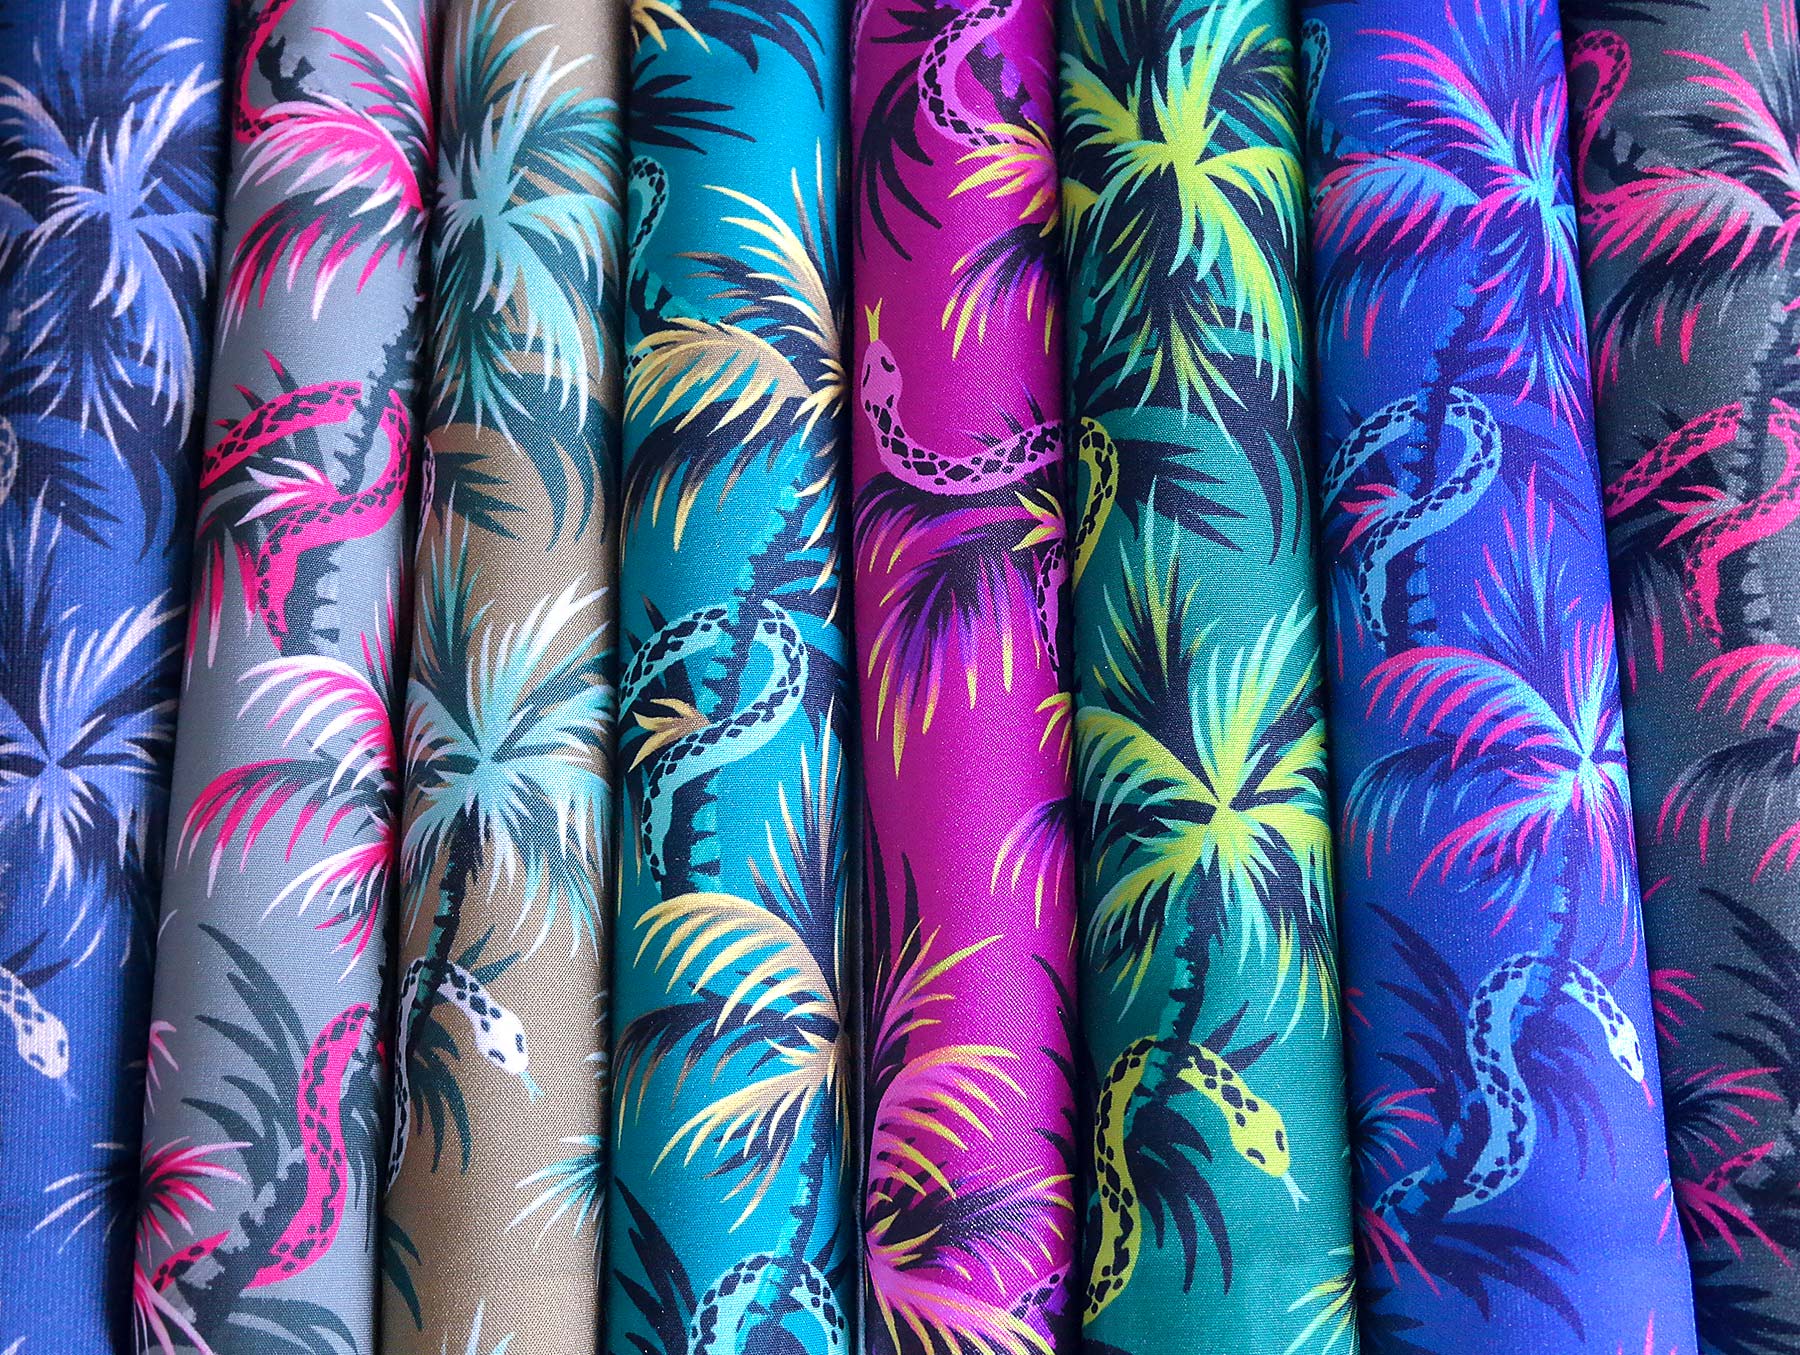 Snake Palms tropical fabric collection by Andrea Muller